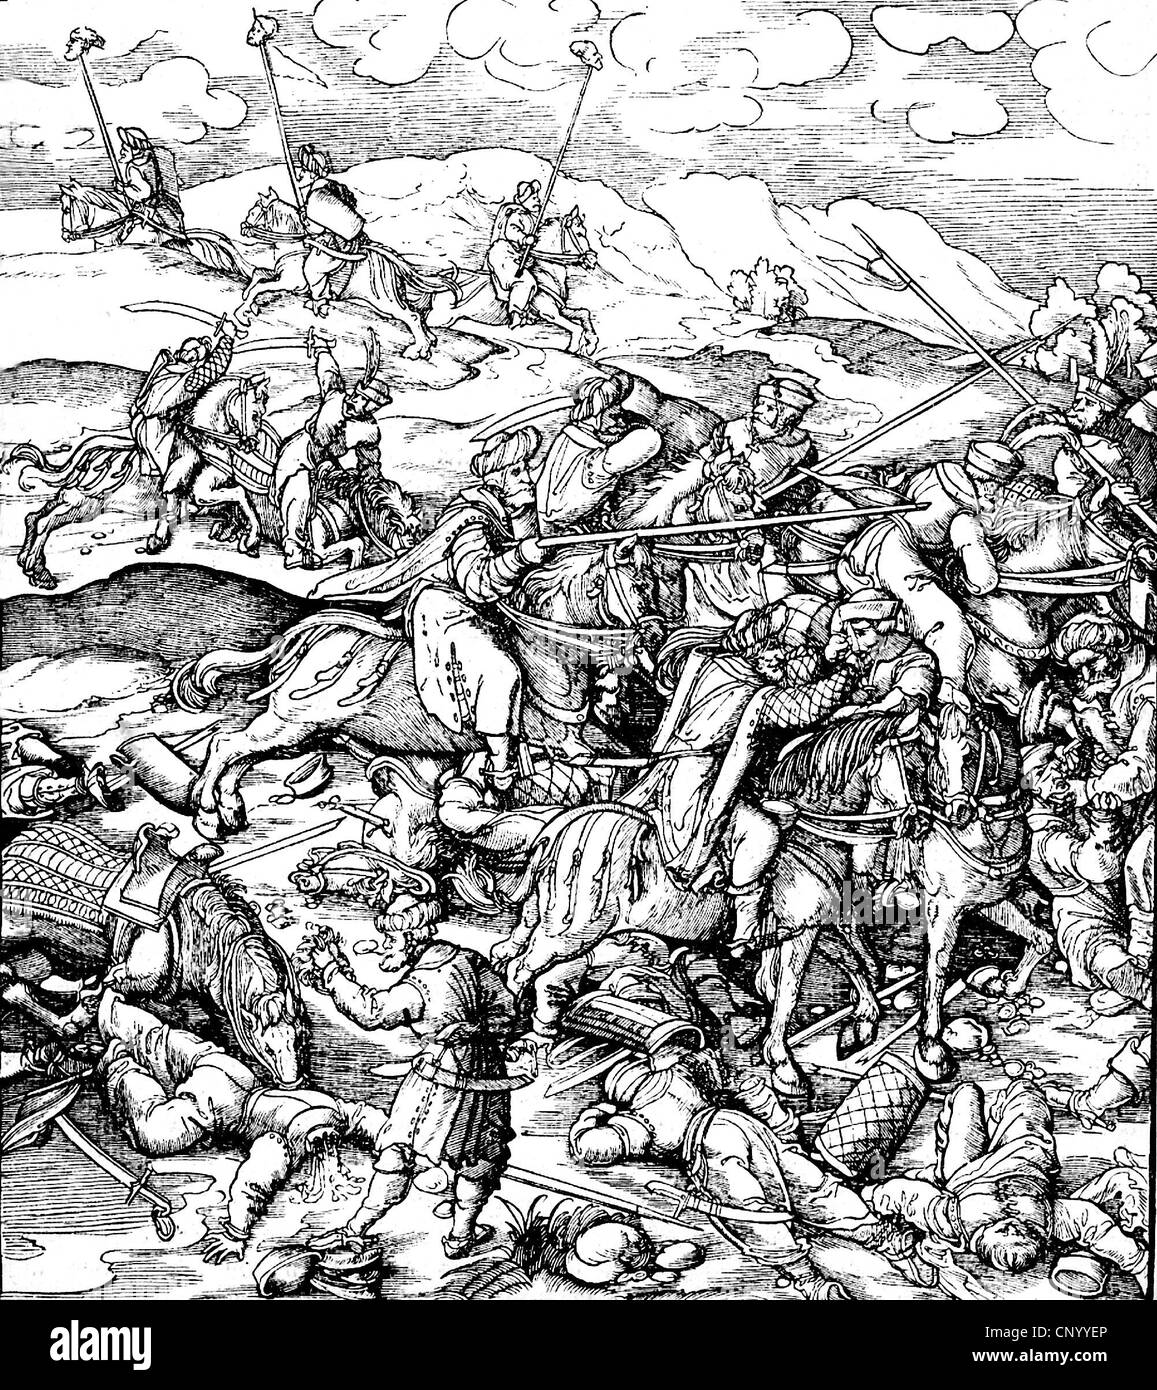 Ottoman Wars, fight against the Turks, woodcut by Hans Burgkmair the Elder, from 'Weisskunig', by Emperor Maximilian I, 1514, Additional-Rights-Clearences-Not Available Stock Photo